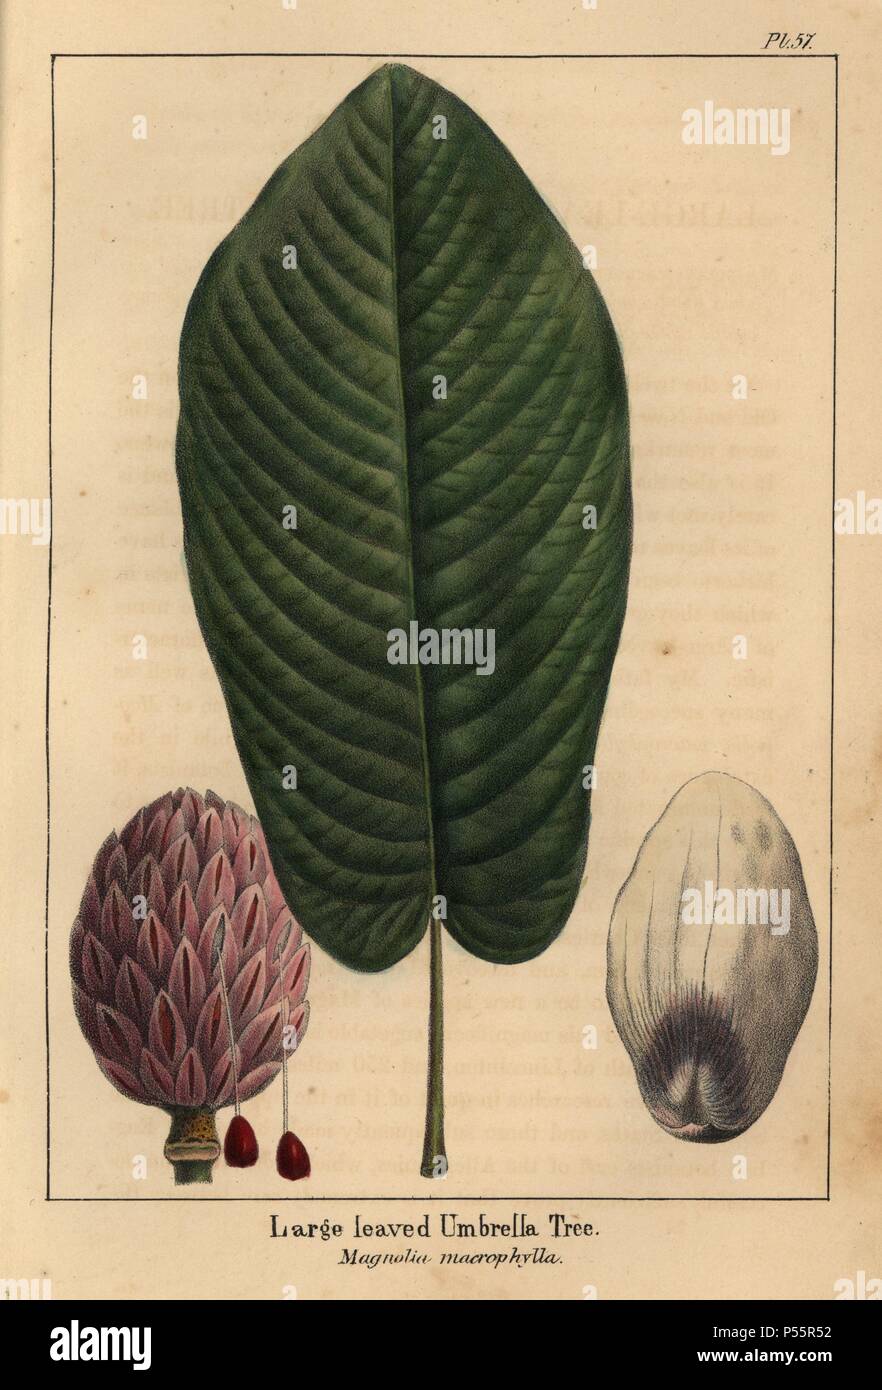 Leaf, cone and petal of the large-leaved umbrella tree, Magnolia macrophylla. Handcolored stipple engraving of a botanical illustration from Francois Andre Michaux's 'North American Sylva,' Philadelphia, 1857. French botanist Michaux (1770-1855) explored America and Canada in 1785 cataloging its native trees. The illustrations were by Pierre Joseph Redoute, Henri Joseph Redoute, and Pancrace Bessa. Stock Photo